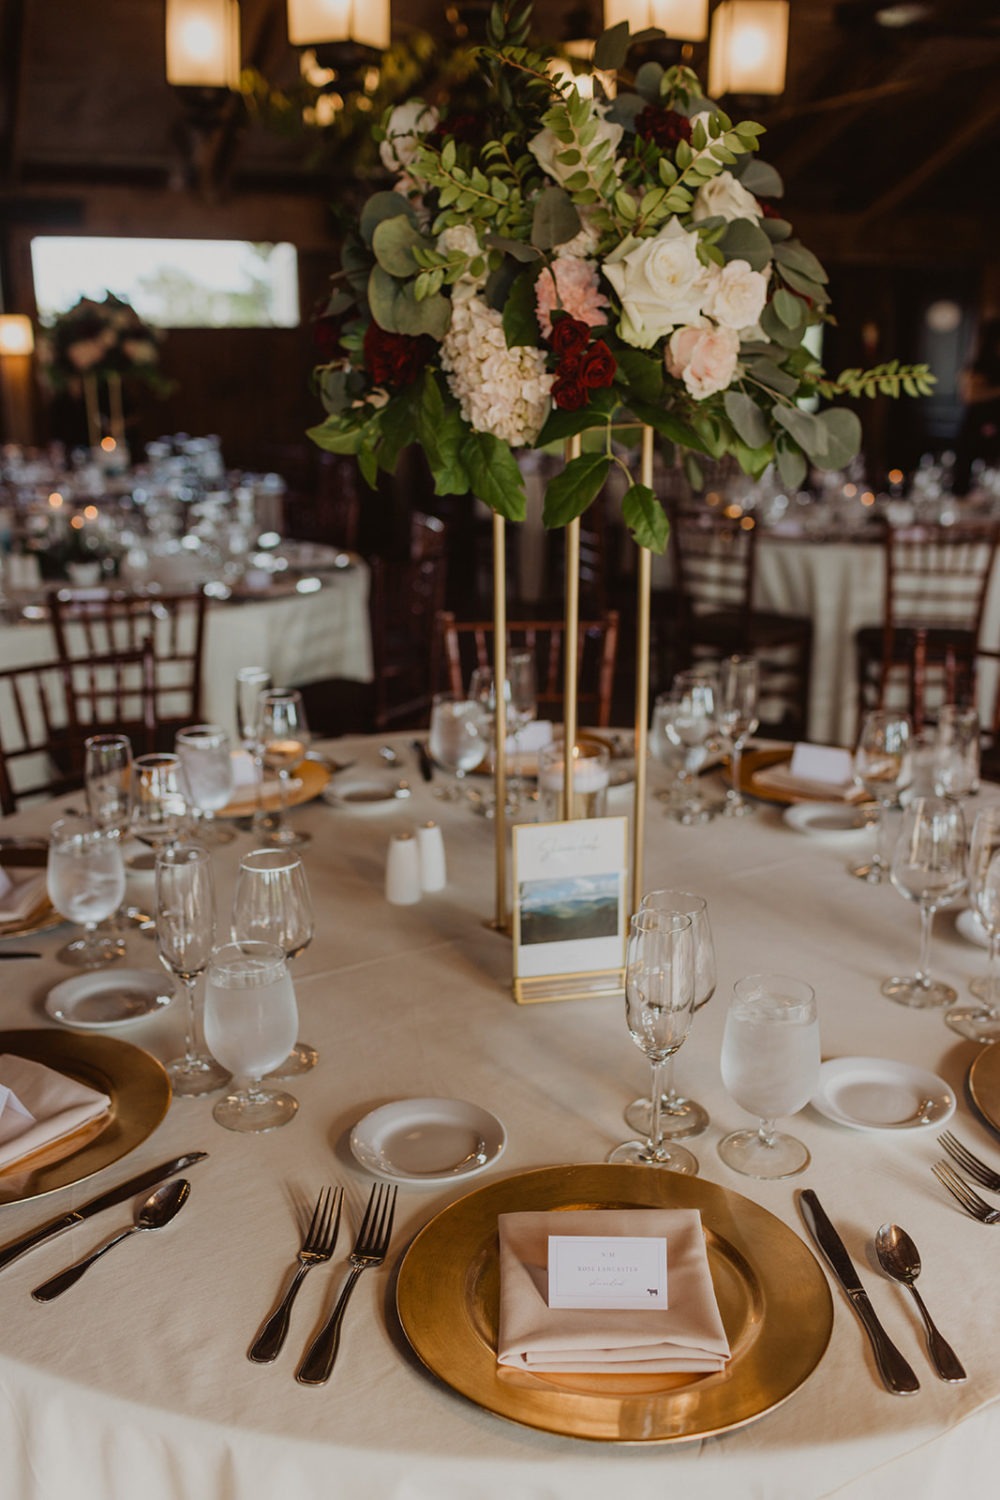 floral design and table setting at wedding reception